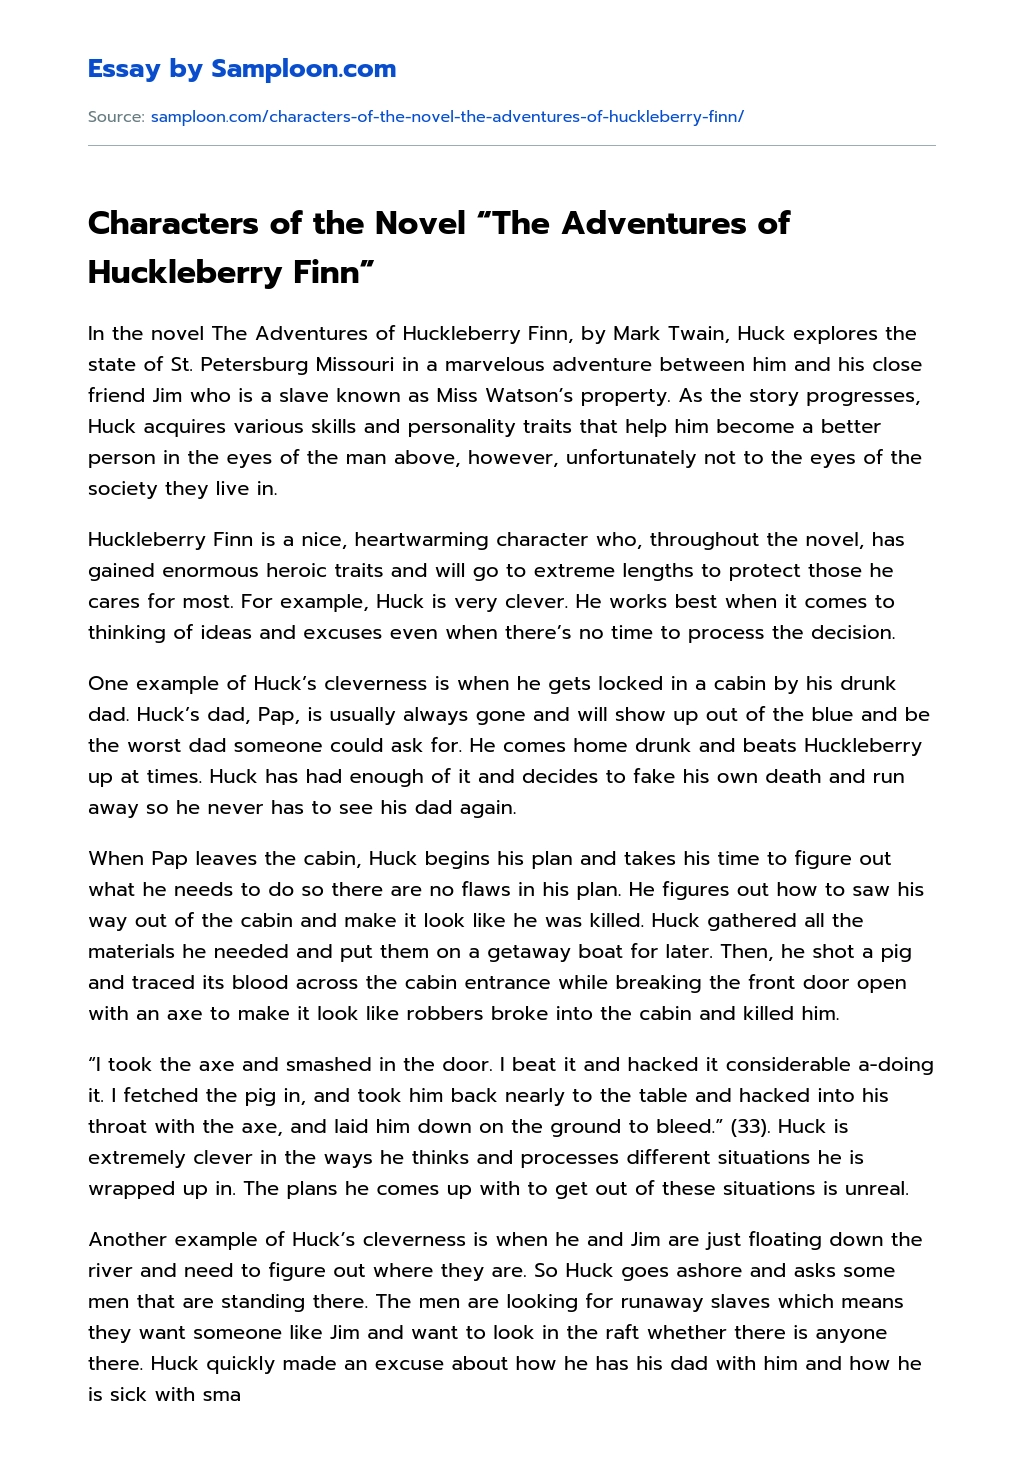 Characters of the Novel “The Adventures of Huckleberry Finn” Analytical Essay essay